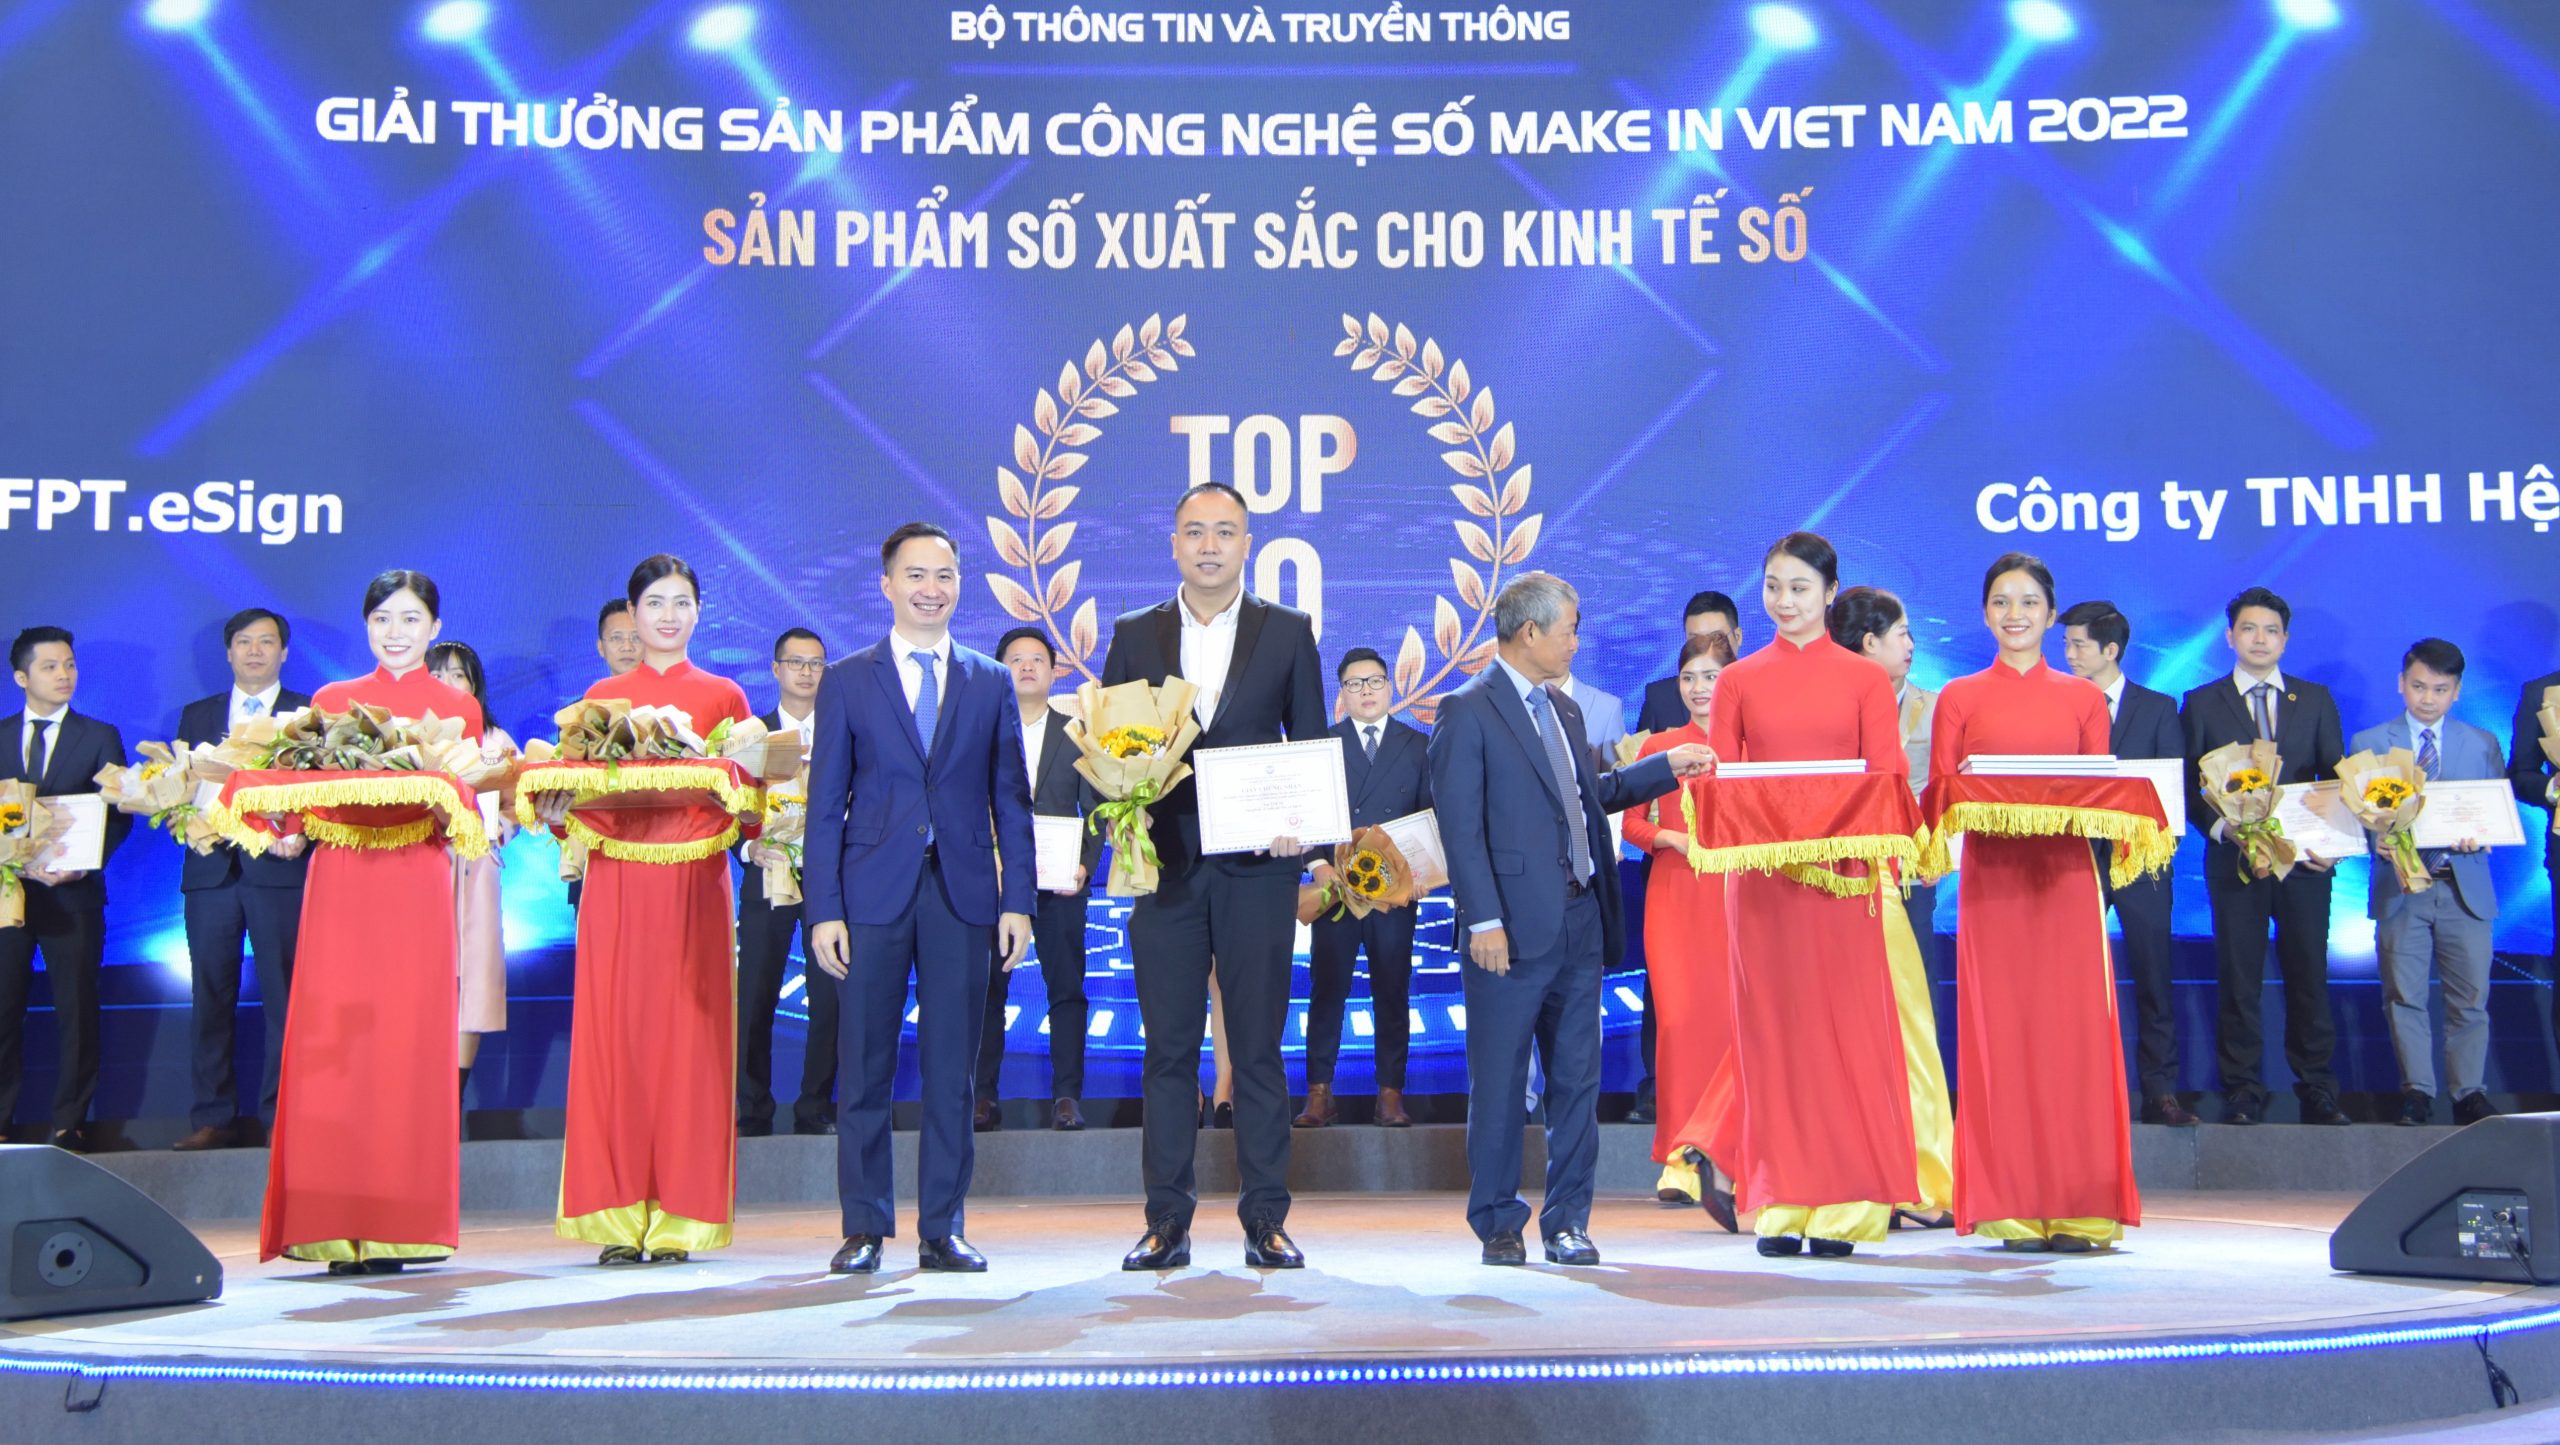 2022 Make in Viet Nam Digital Technology Product Awards  – Top 10 Excellent Digital Products for the Digital Economy category – Remote Signing Solution (FPT.eSign)